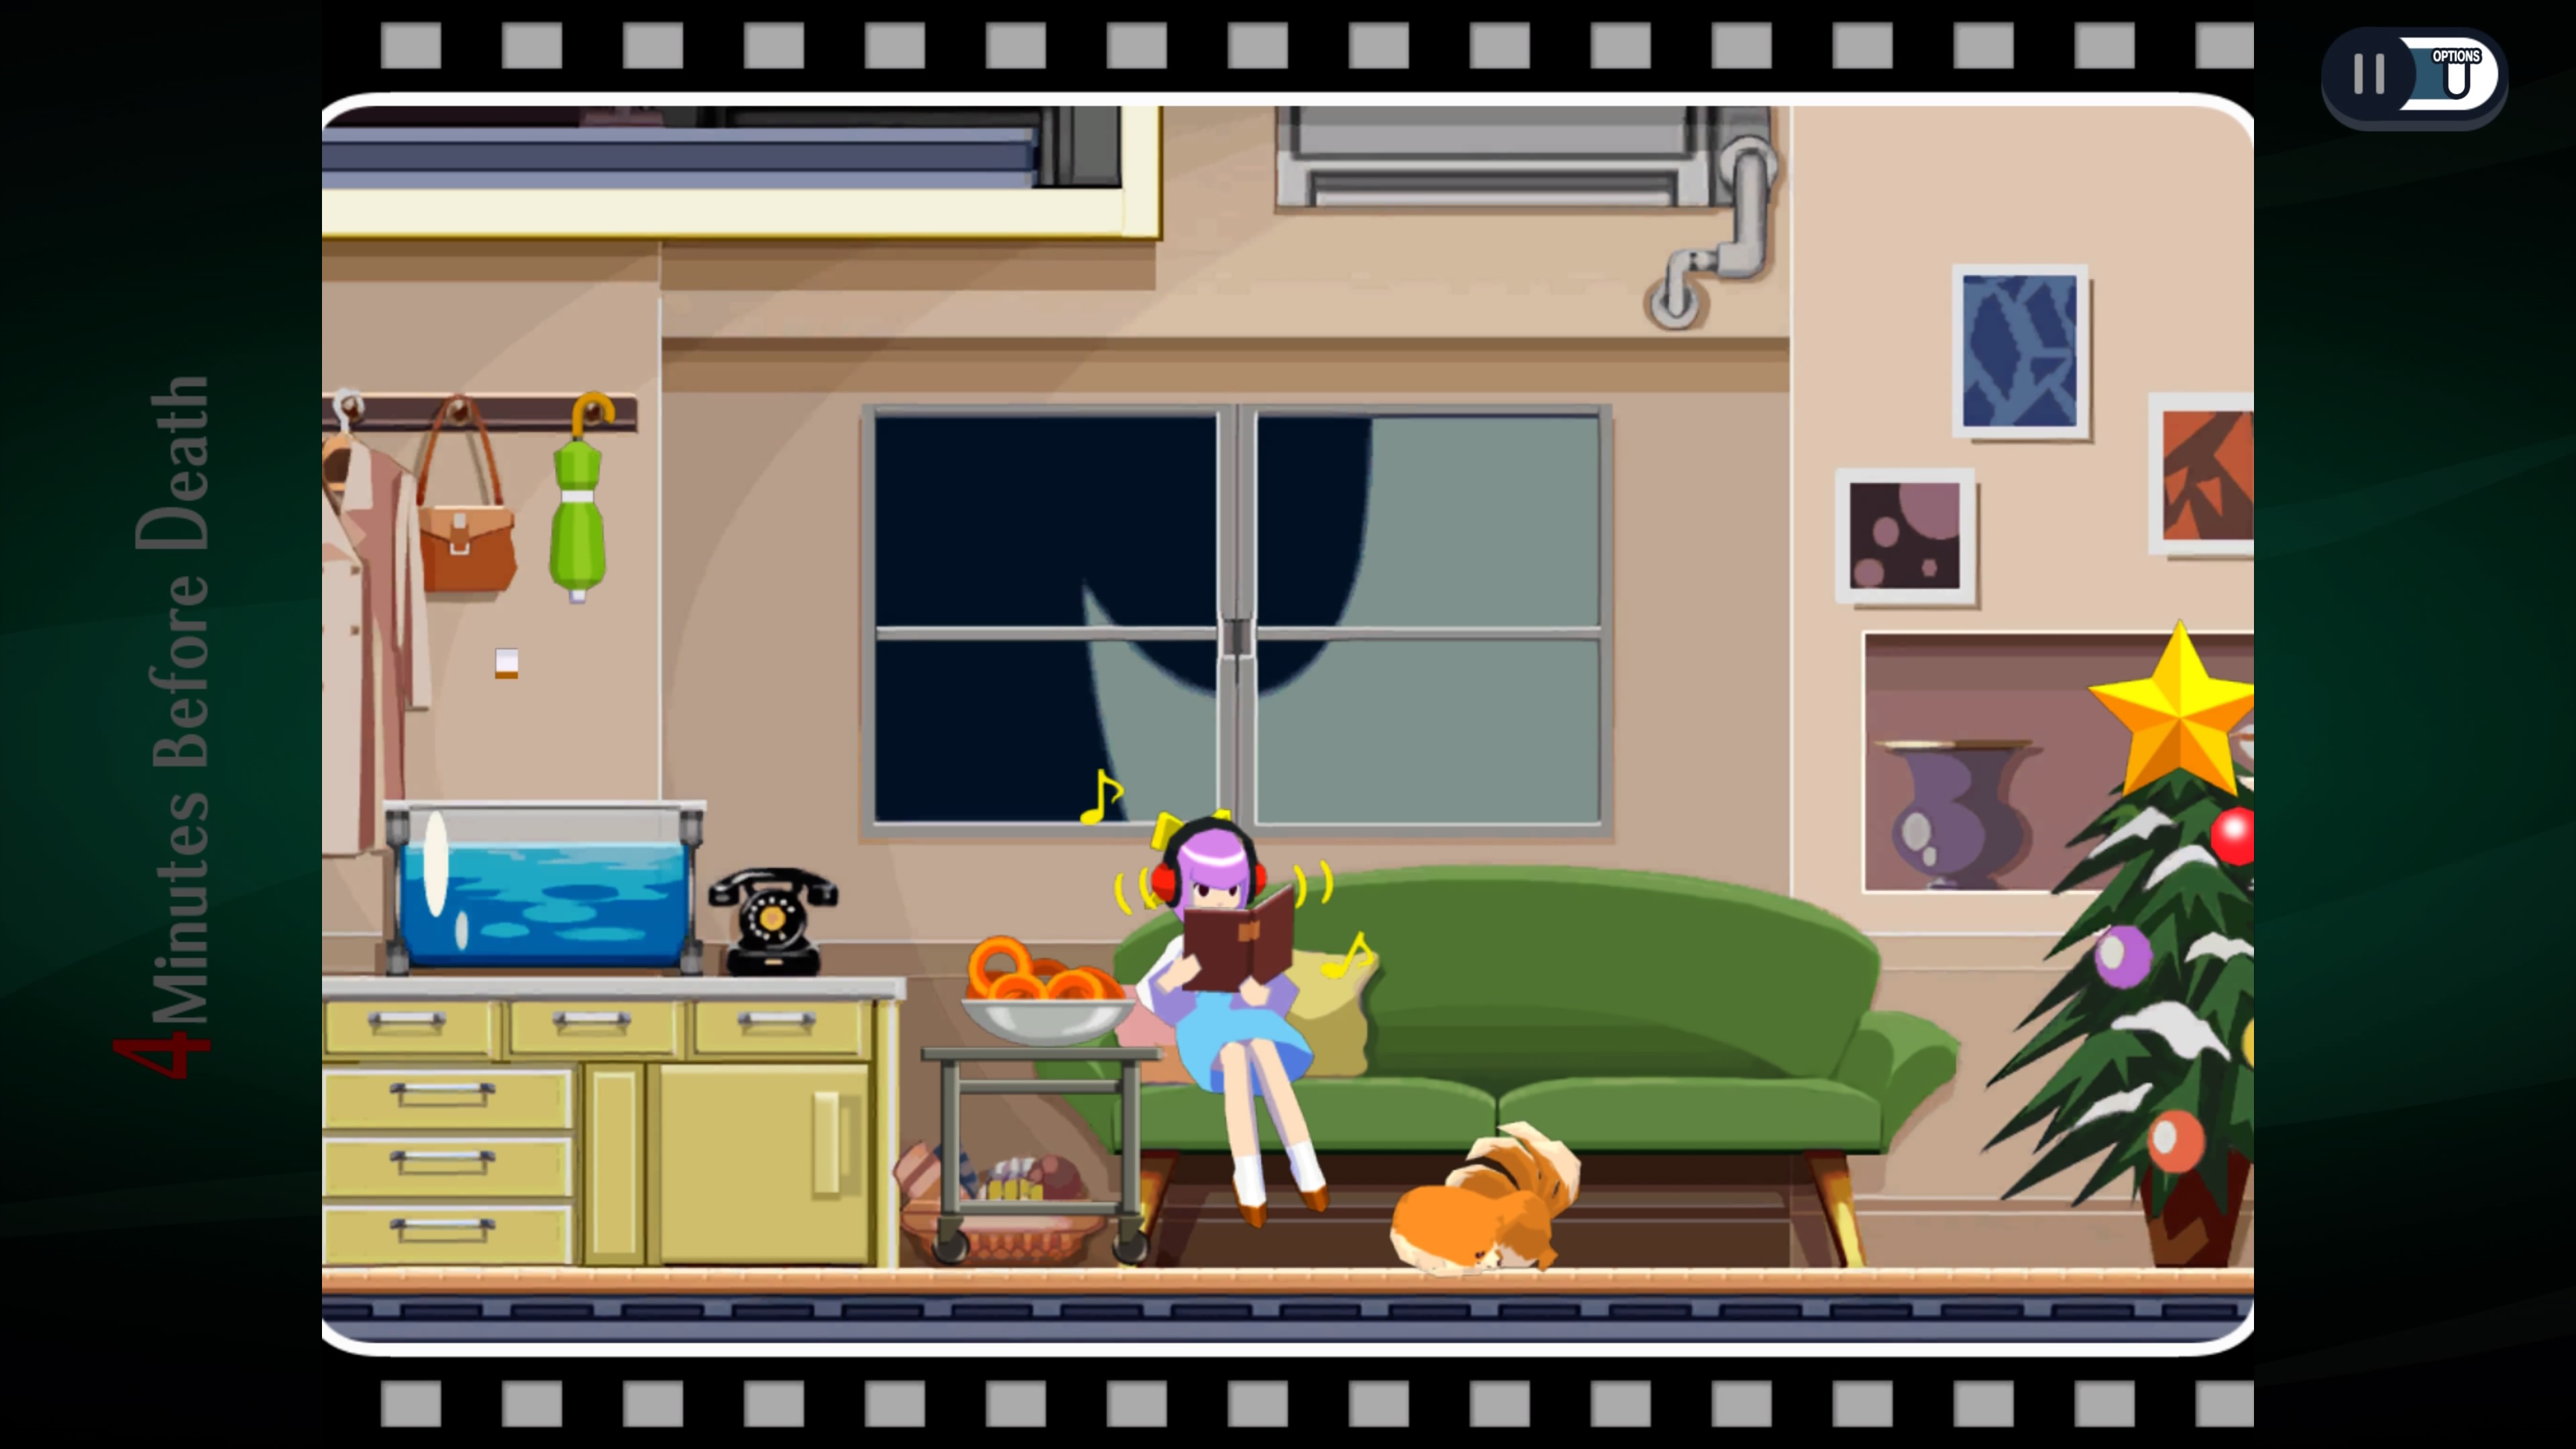 Ghost Trick review: An anime girl with purple hair, wearing a blue dress, is sitting on a green sofa. A small brown dog is at her feet, and a small Christmas tree is to the right, with a fish tank on the left